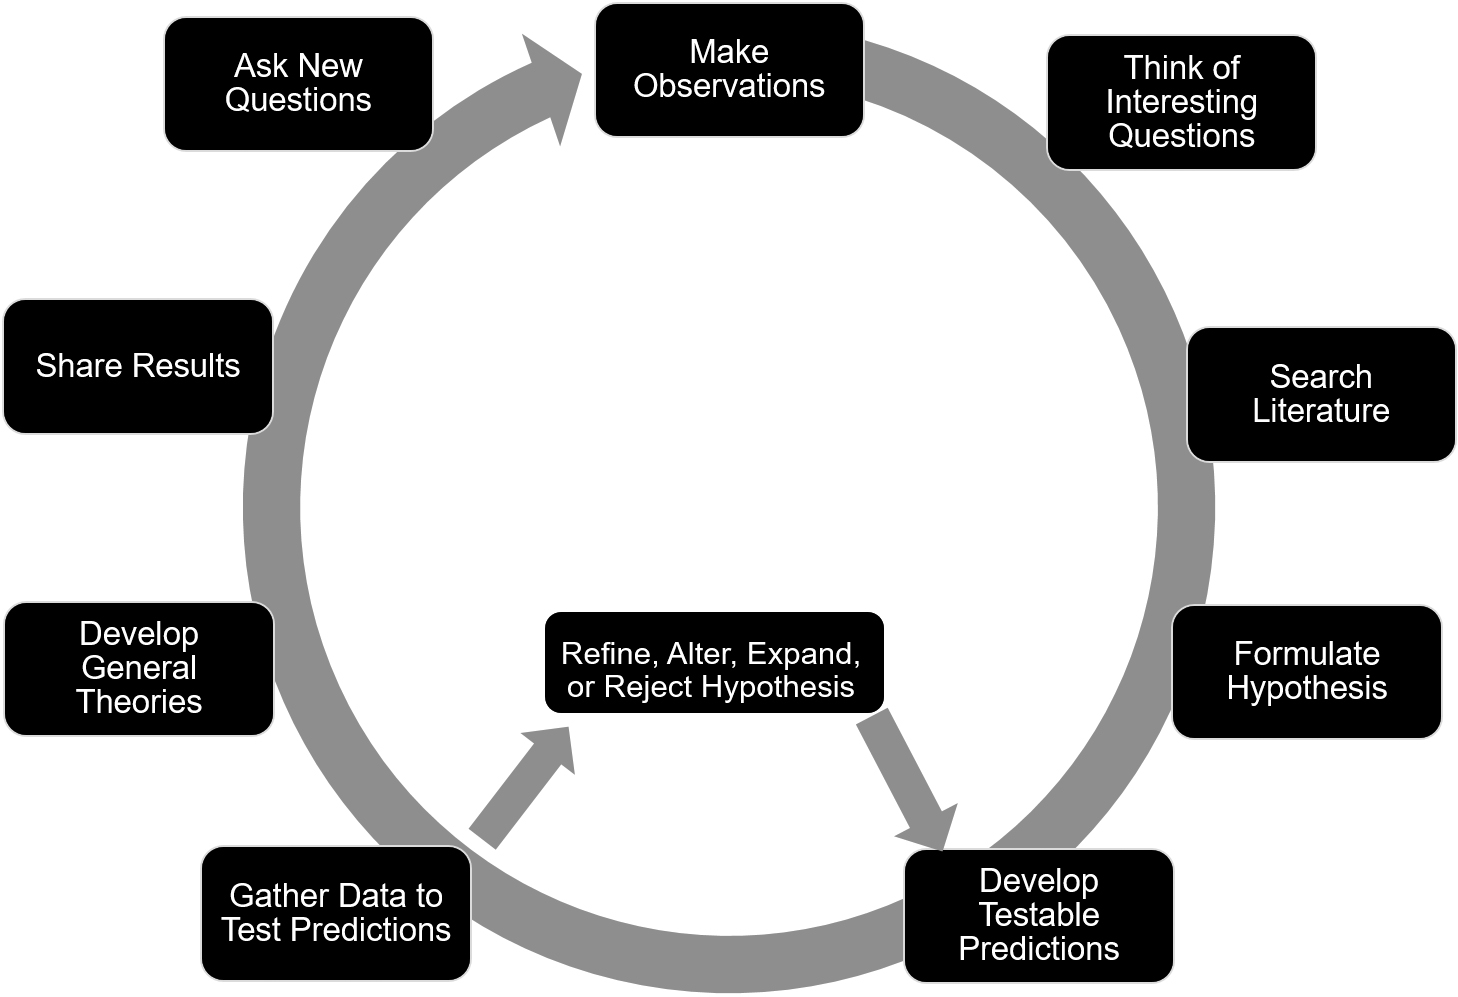 Scientific method cyclical diagram used in the mapping project.